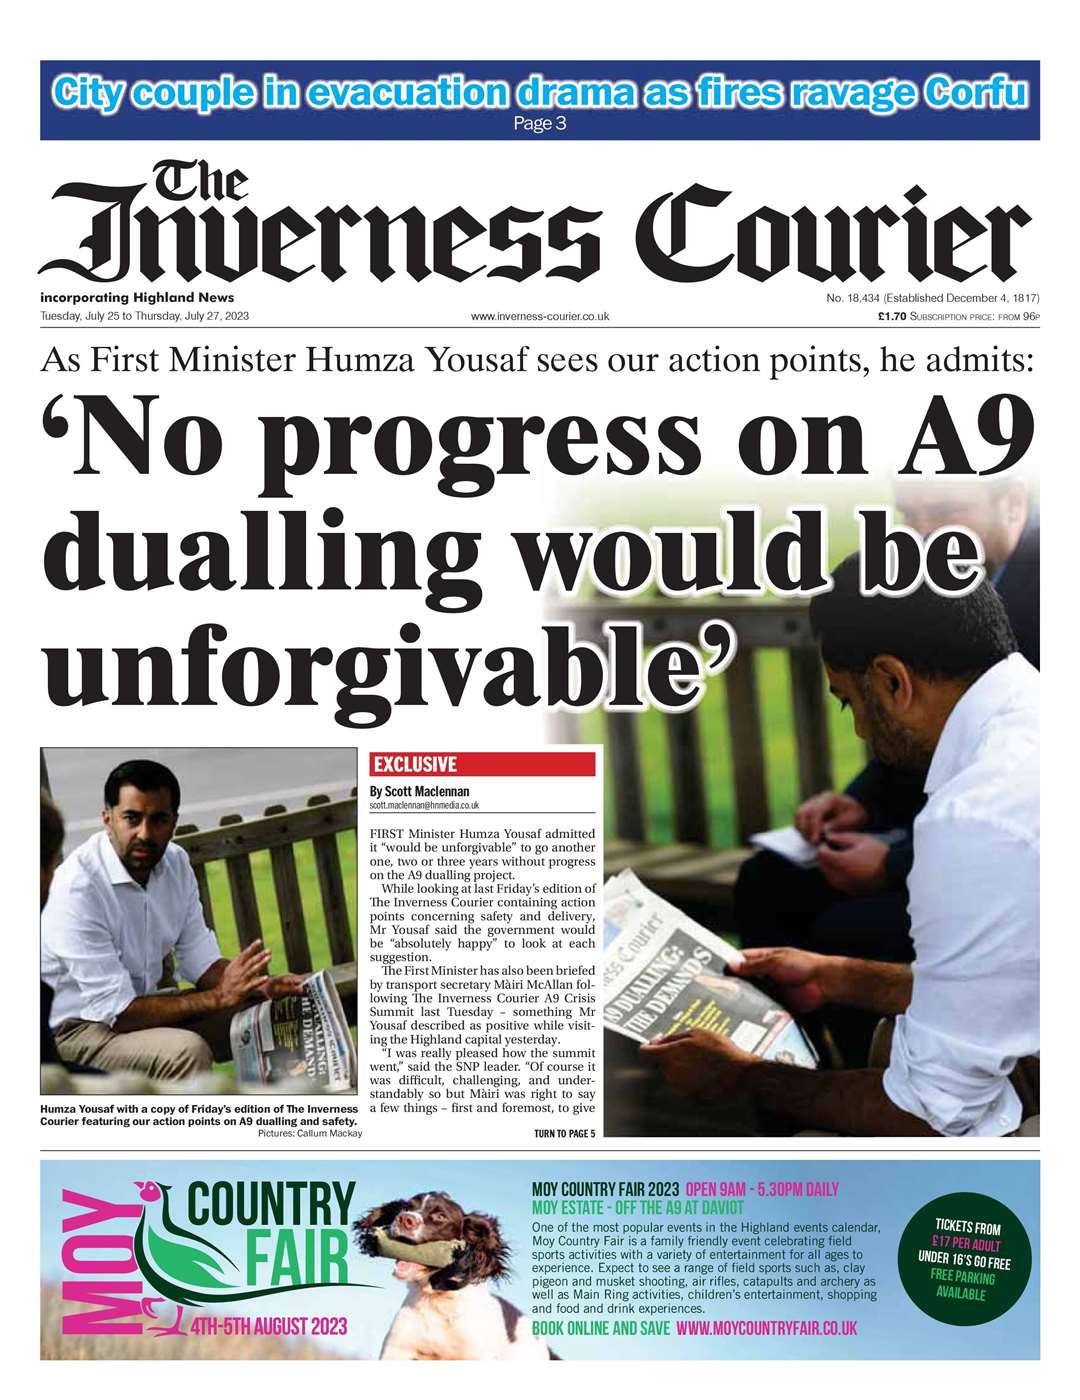 The Inverness Courier, July 25, front page.